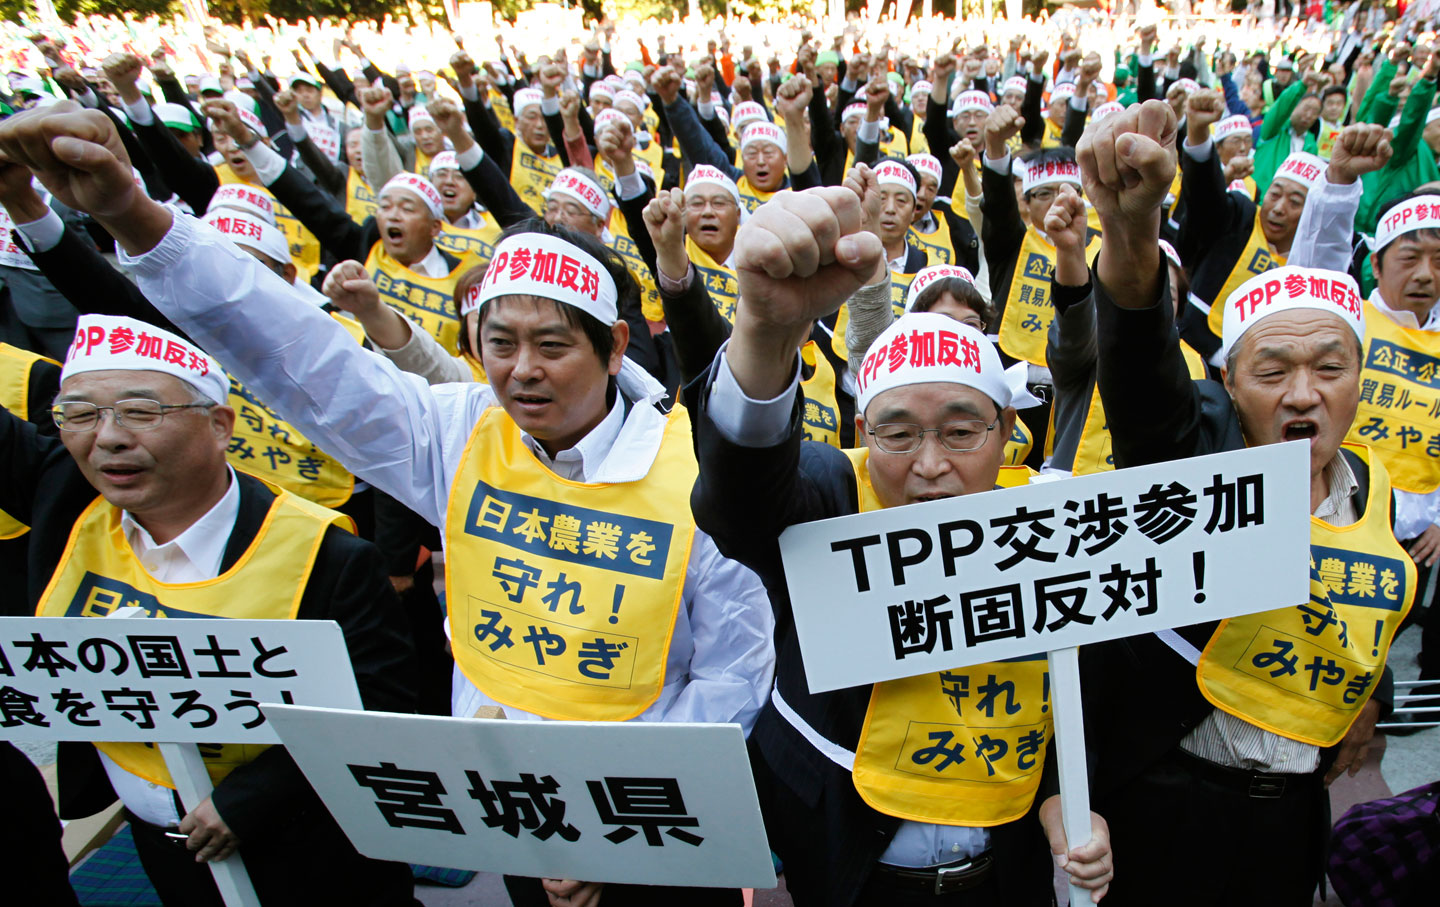 Farmers in Japan protesting against the TPP earlier this year. Citizens around the world have been protesting the secret trade deal.